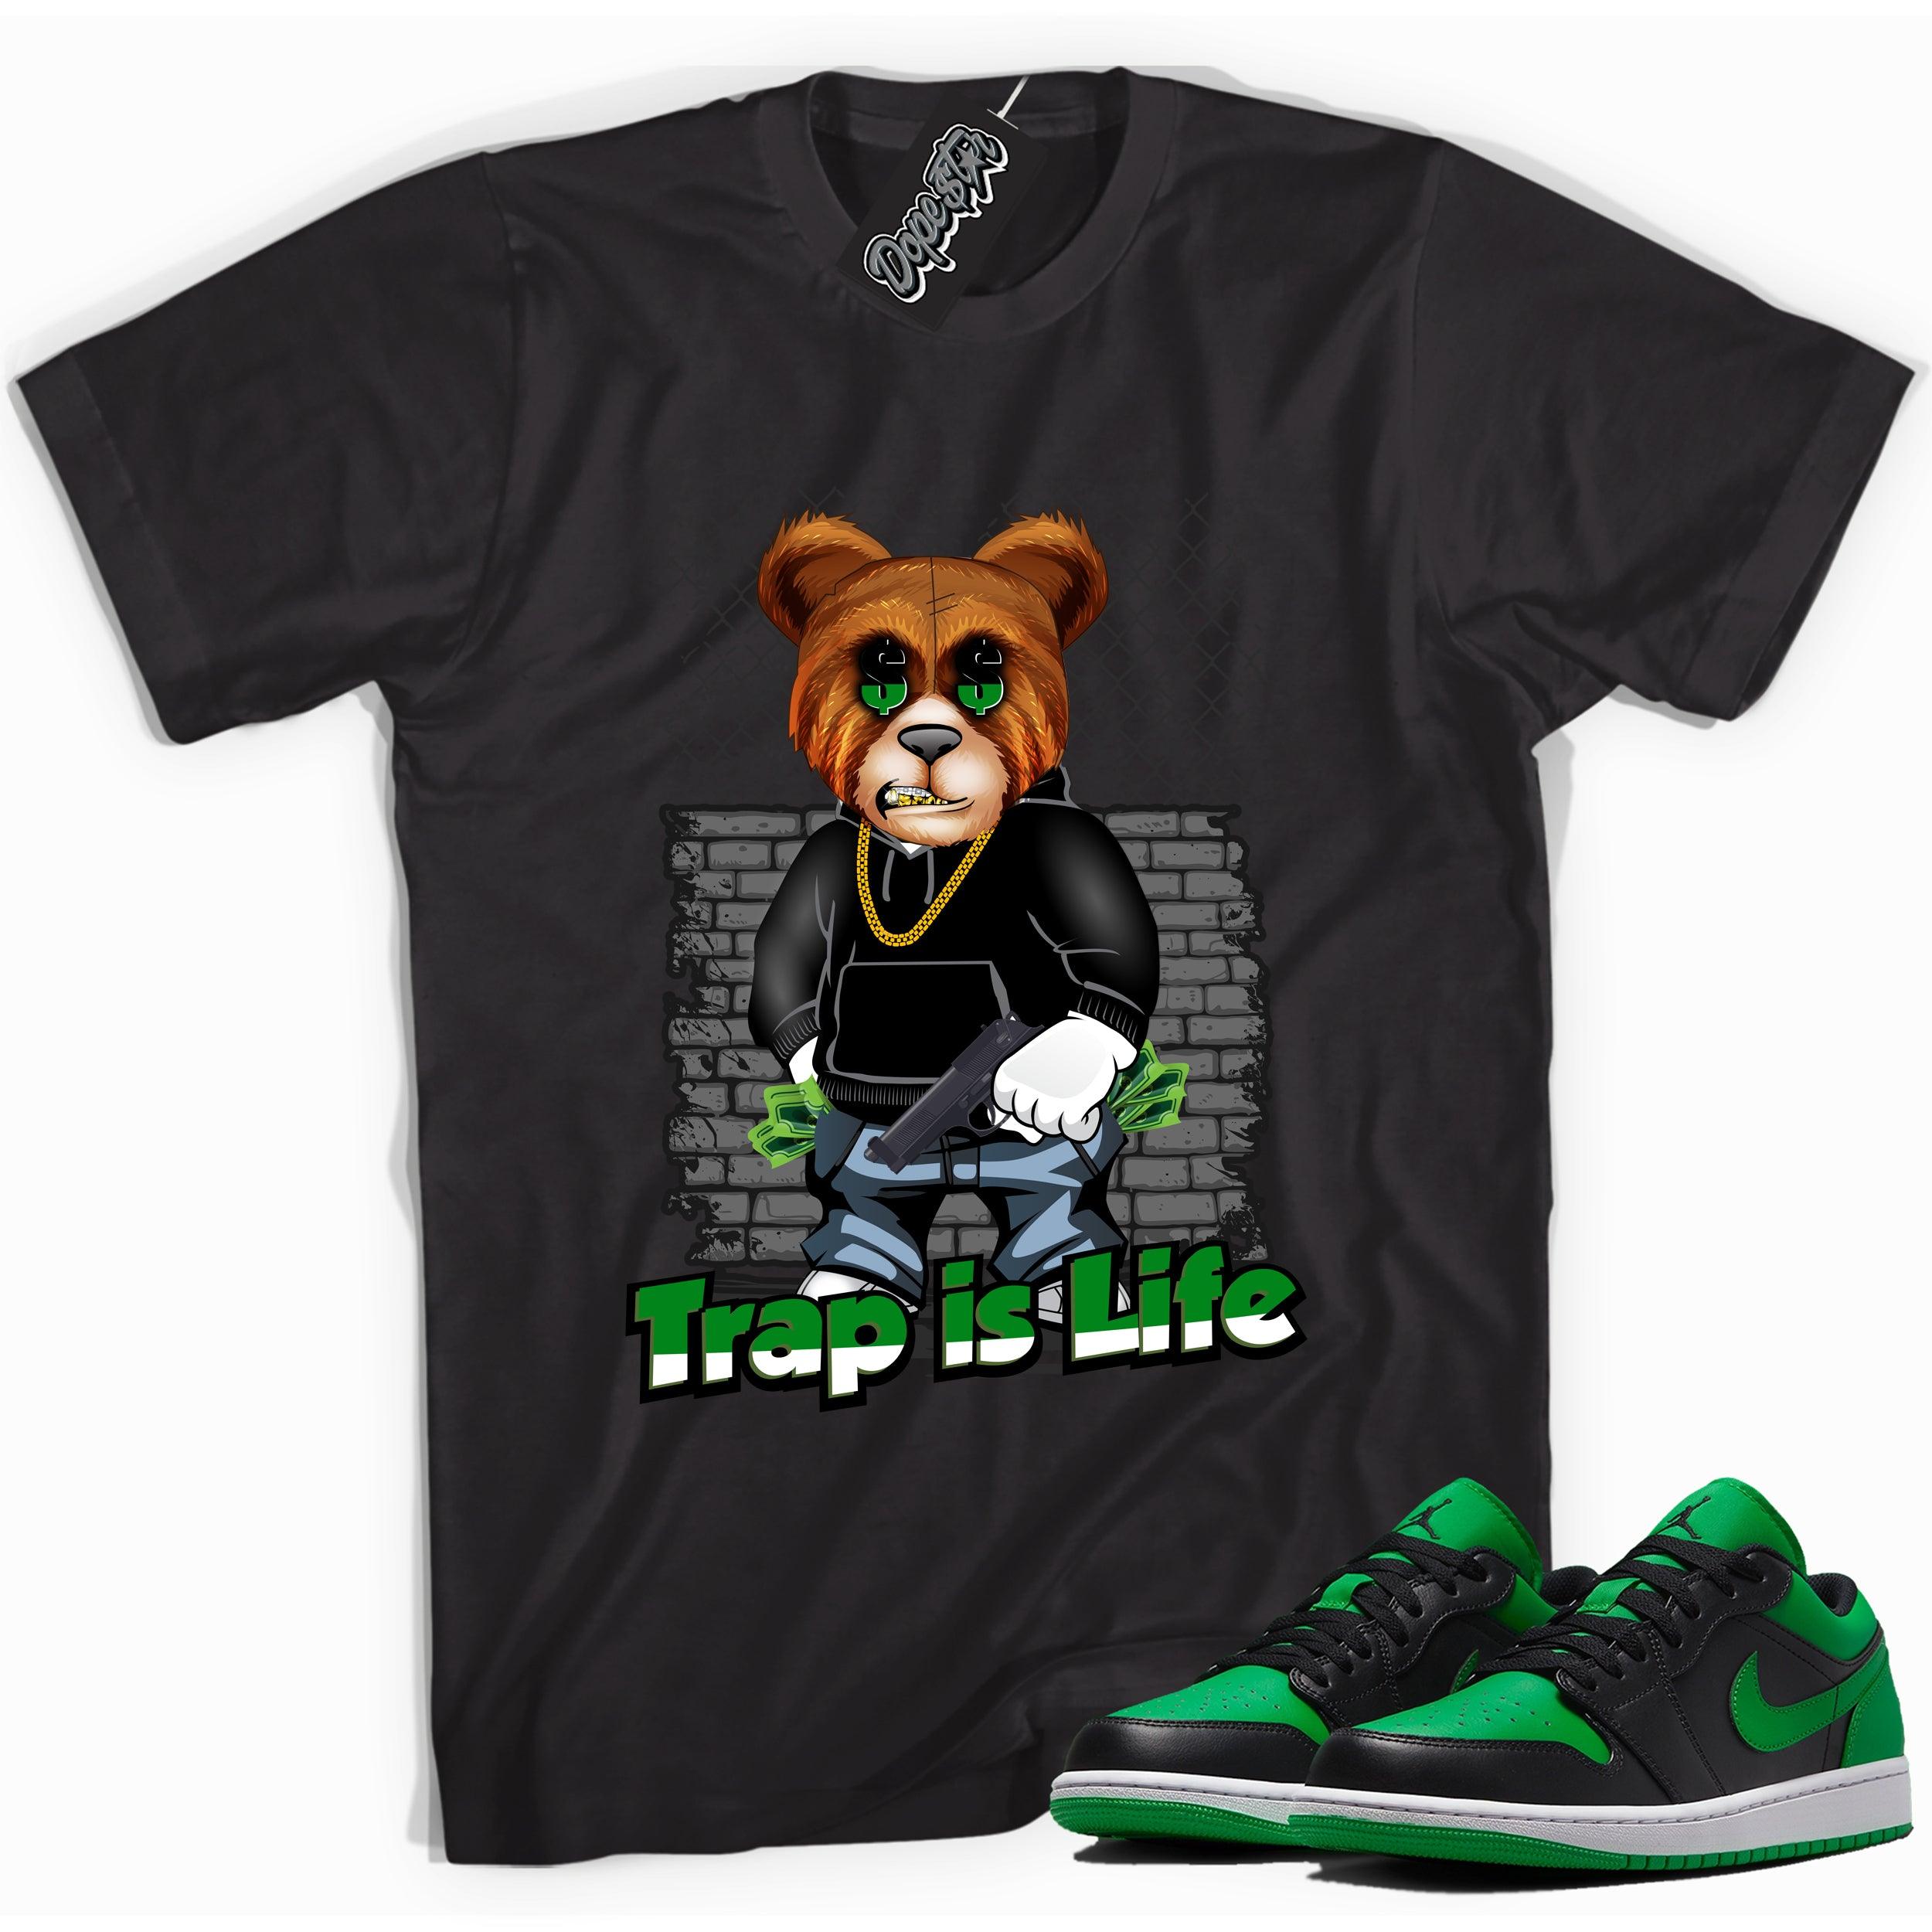 Cool black graphic tee with 'trap is life' print, that perfectly matches Air Jordan 1 Low Lucky Green sneakers